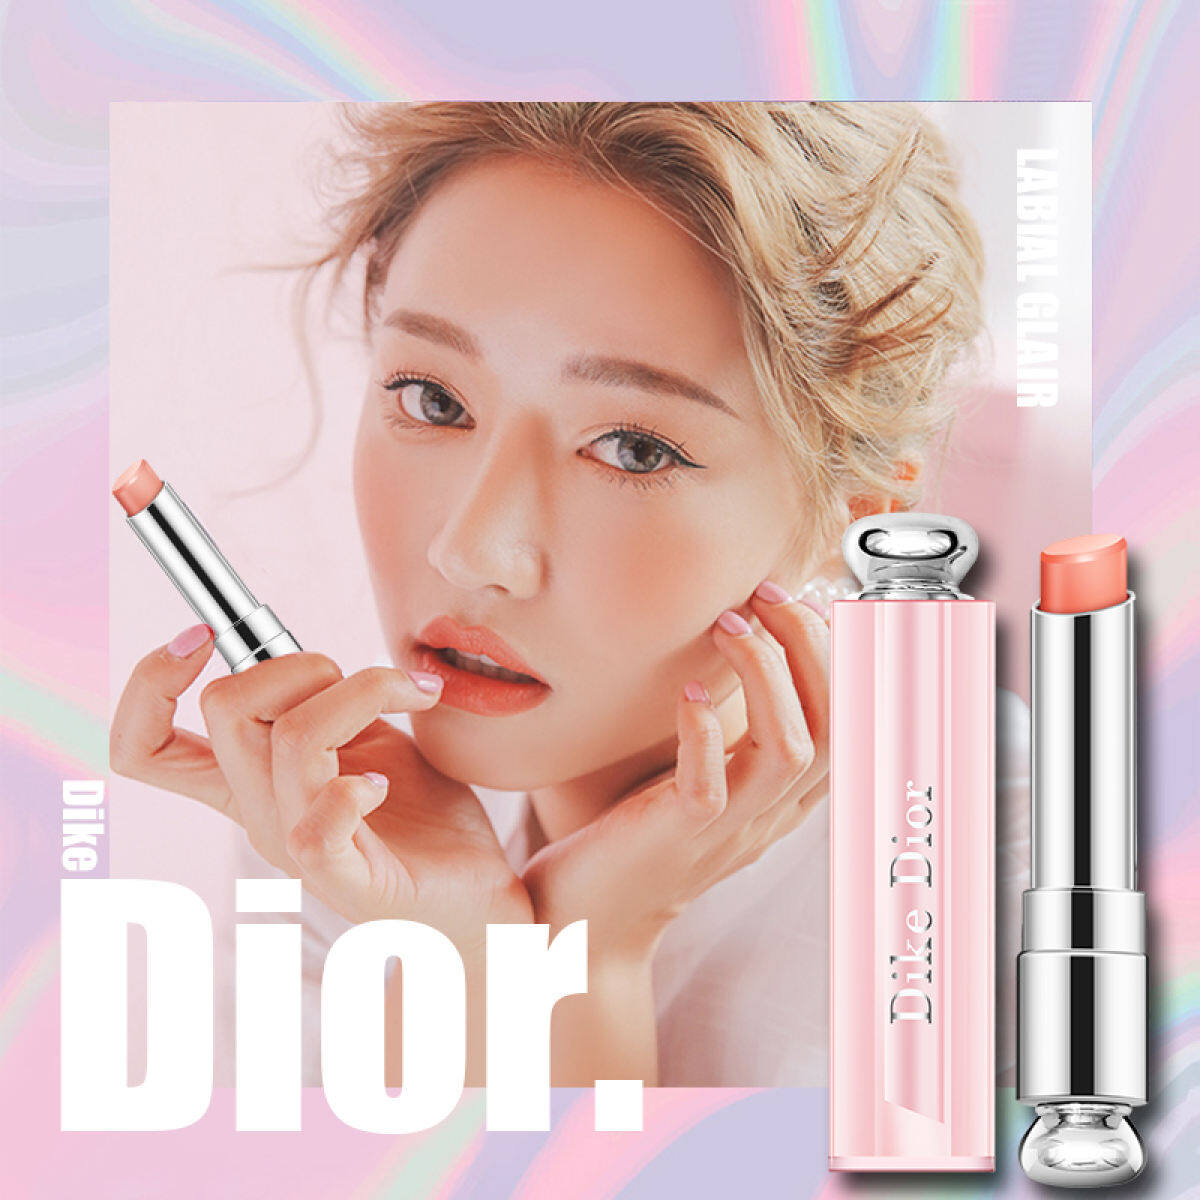 Amazoncom  Dior Addict Lip Glow Reviving Lip Balm Full Size 32g 011  Rose Gold  Beauty  Personal Care